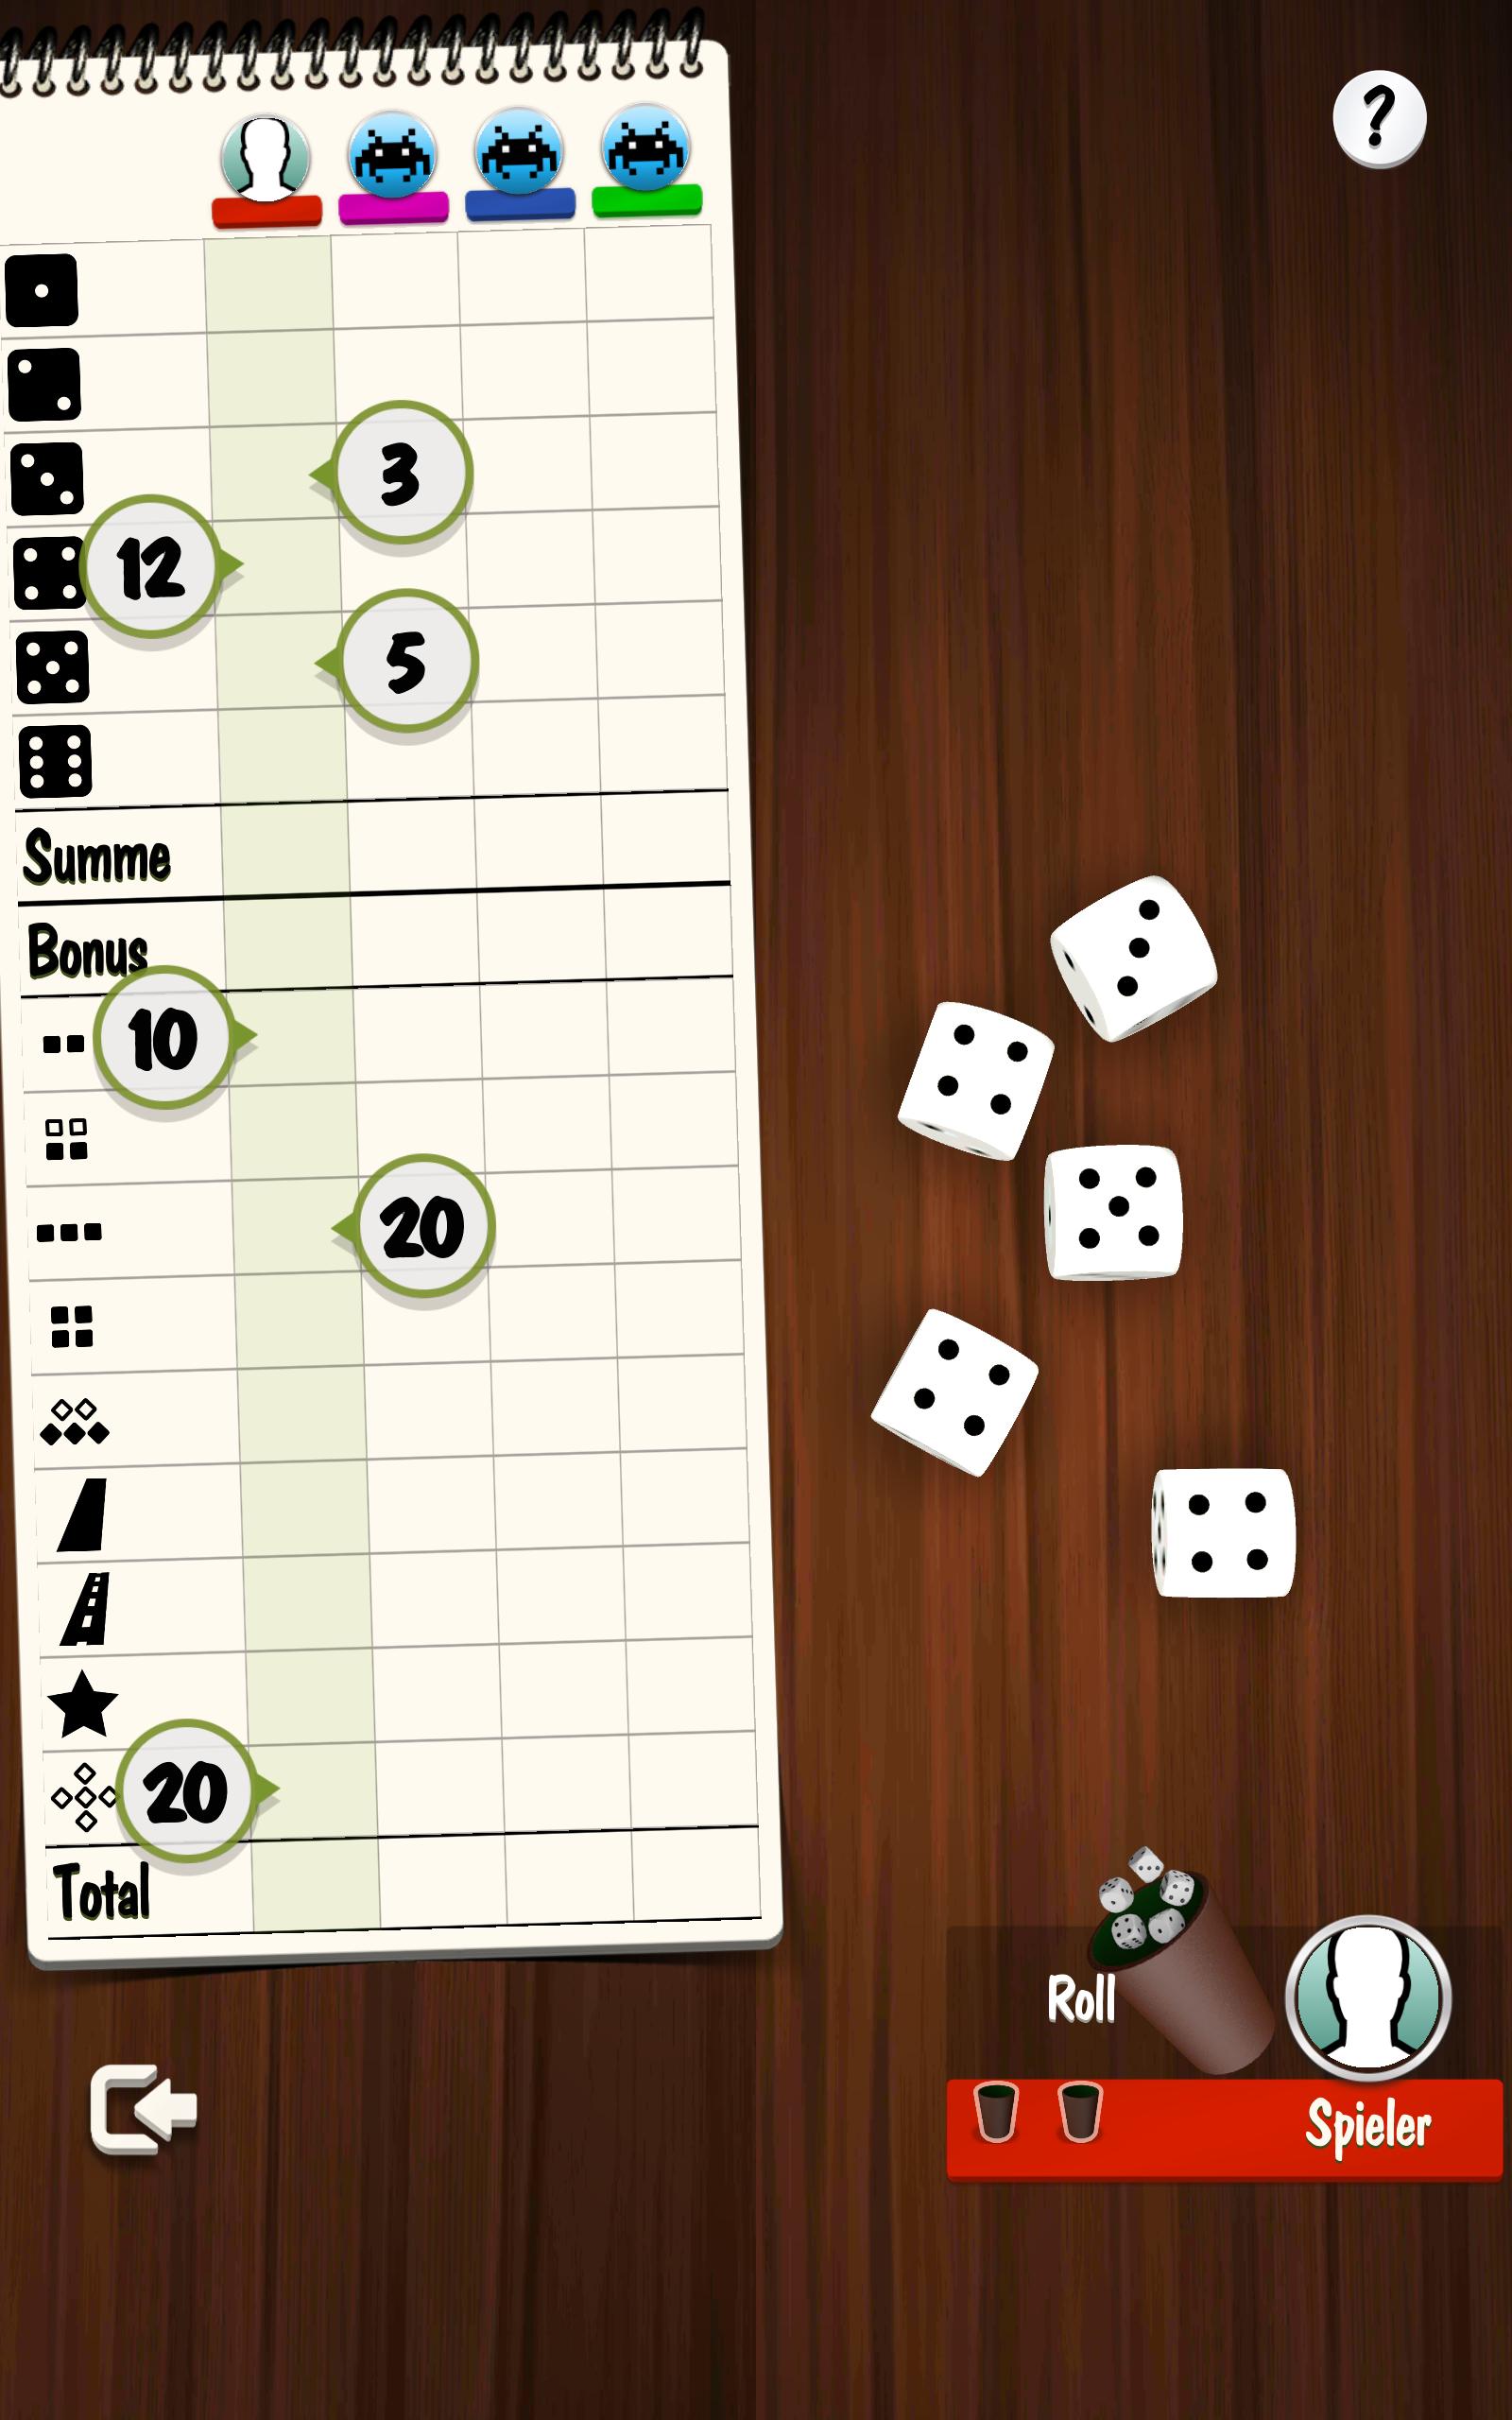 Yatzy Offline and Online - free dice game 3.3.4 Screenshot 12